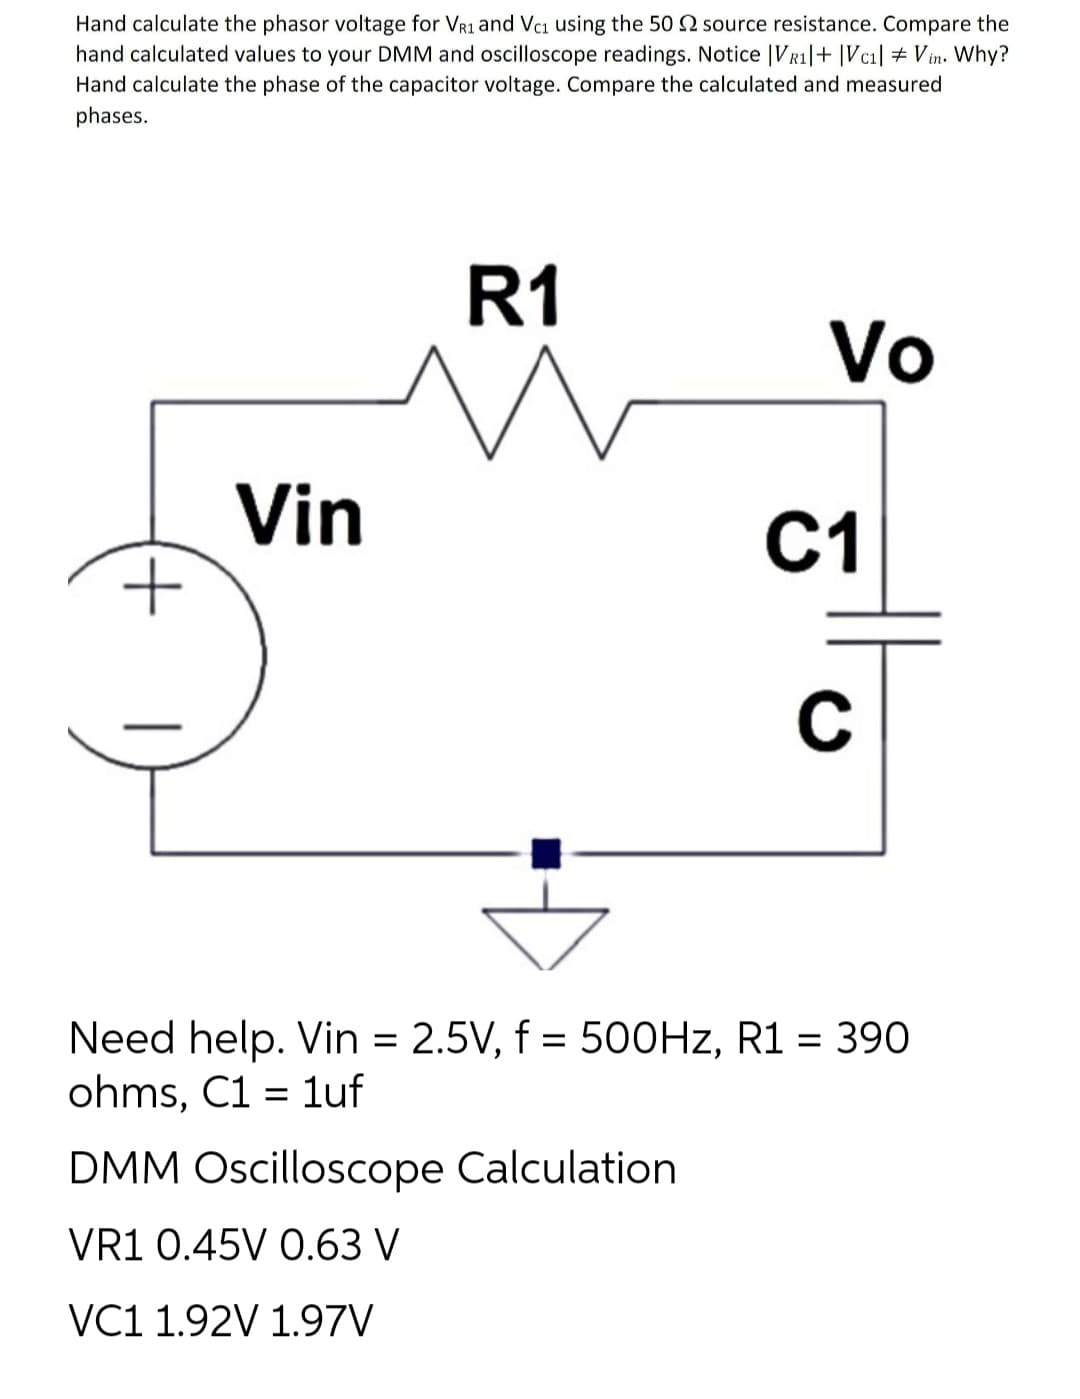 Hand calculate the phasor voltage for VR1 and Vc₁ using the 50 2 source resistance. Compare the
hand calculated values to your DMM and oscilloscope readings. Notice |VR1| + |Vc₁| + Vin. Why?
Hand calculate the phase of the capacitor voltage. Compare the calculated and measured
phases.
+
Vin
R1
M
Vo
DMM Oscilloscope Calculation
VR1 0.45V 0.63 V
VC1 1.92V 1.97V
C1
C
Need help. Vin = 2.5V, f = 500Hz, R1 = 390
ohms, C1 = 1uf